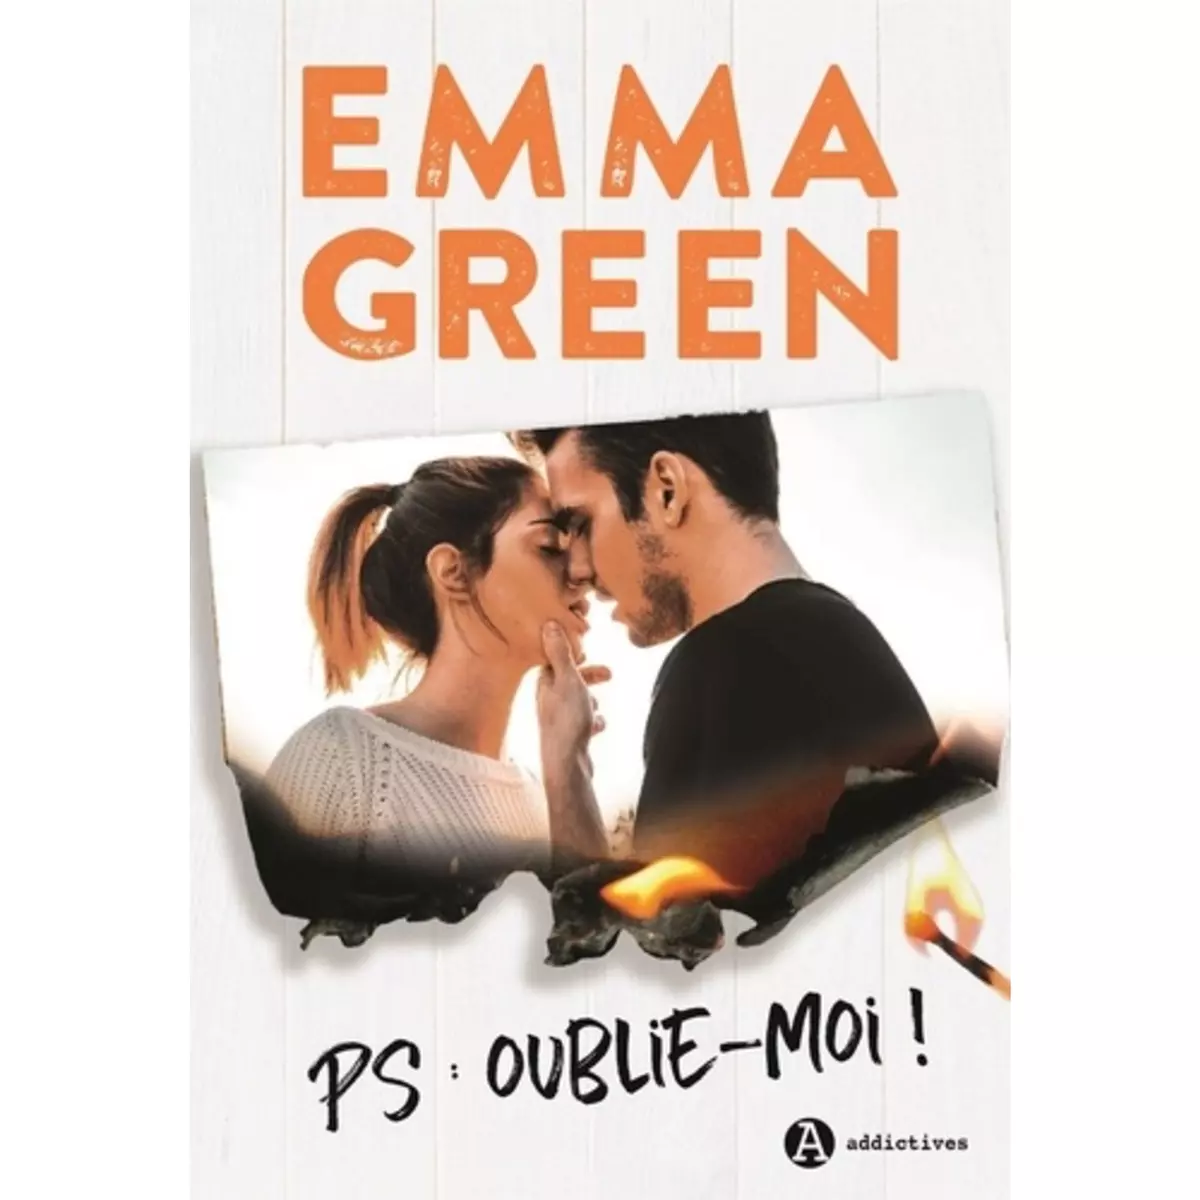  PS : OUBLIE-MOI !, Green Emma